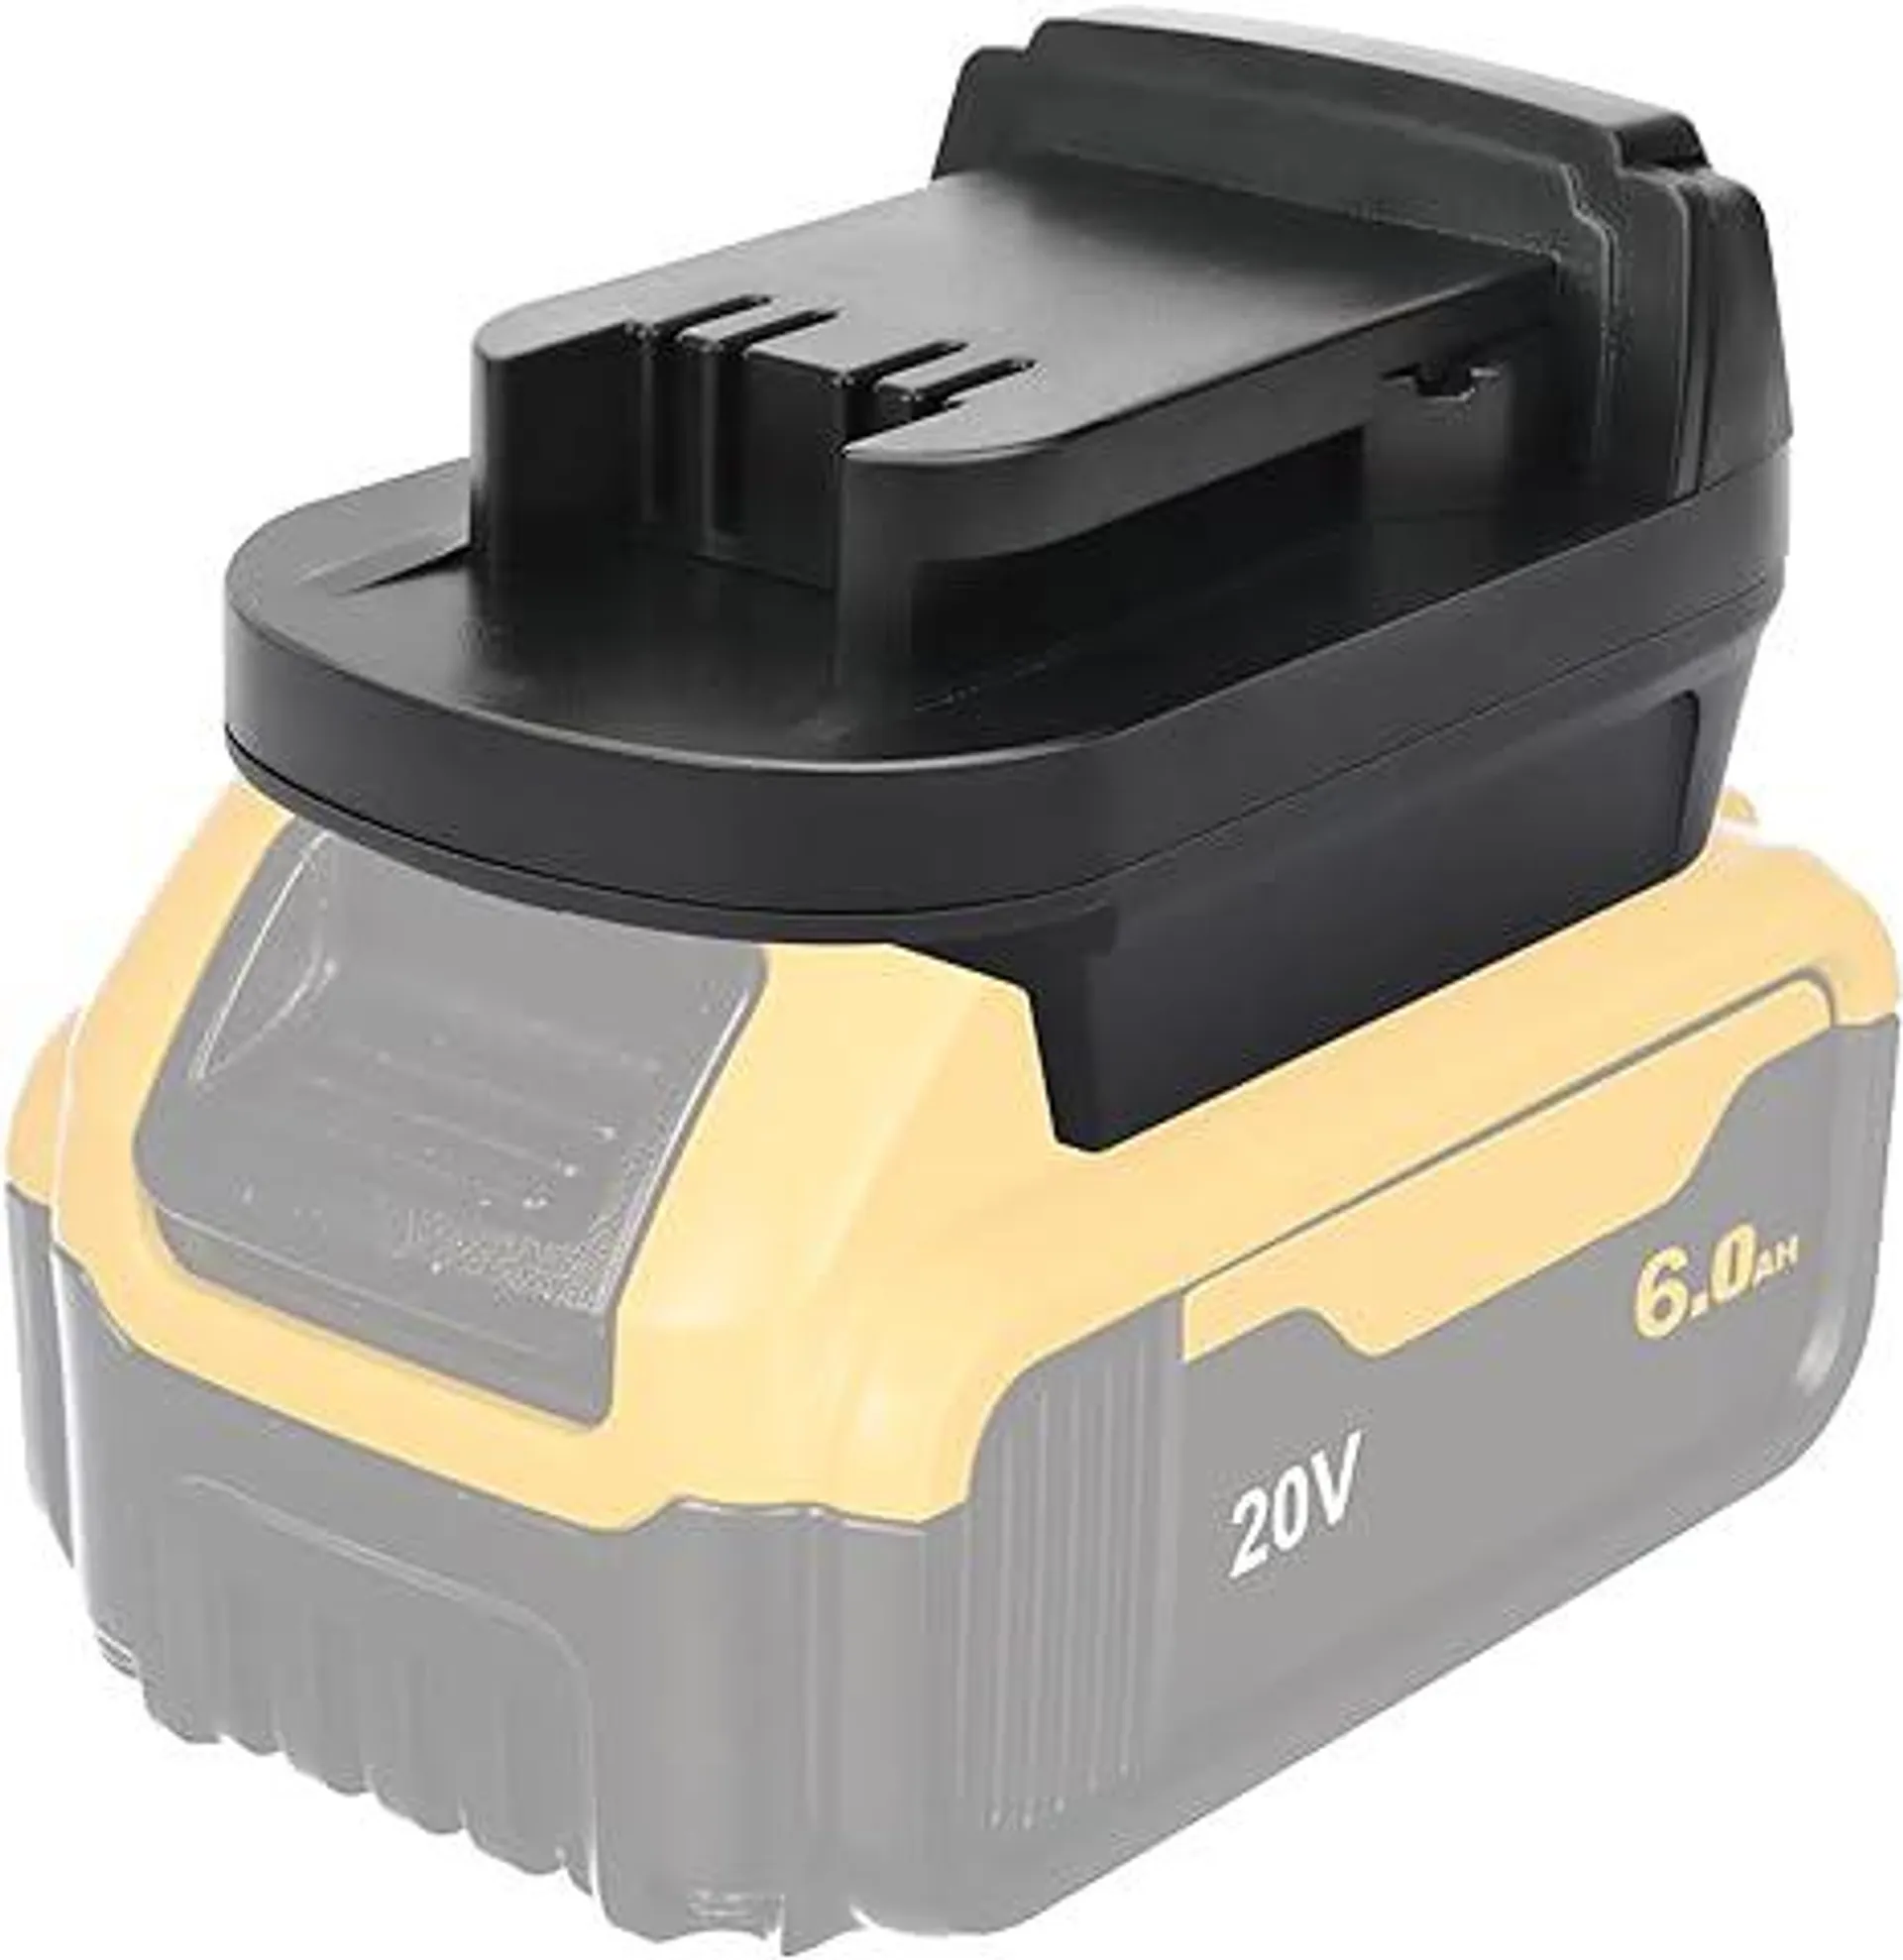 Battery Adapter for Dewalt to Milwaukee Battery,for Dewalt 20V/60V Battery Convert to Milwaukee 18V M18 Cordless Tool